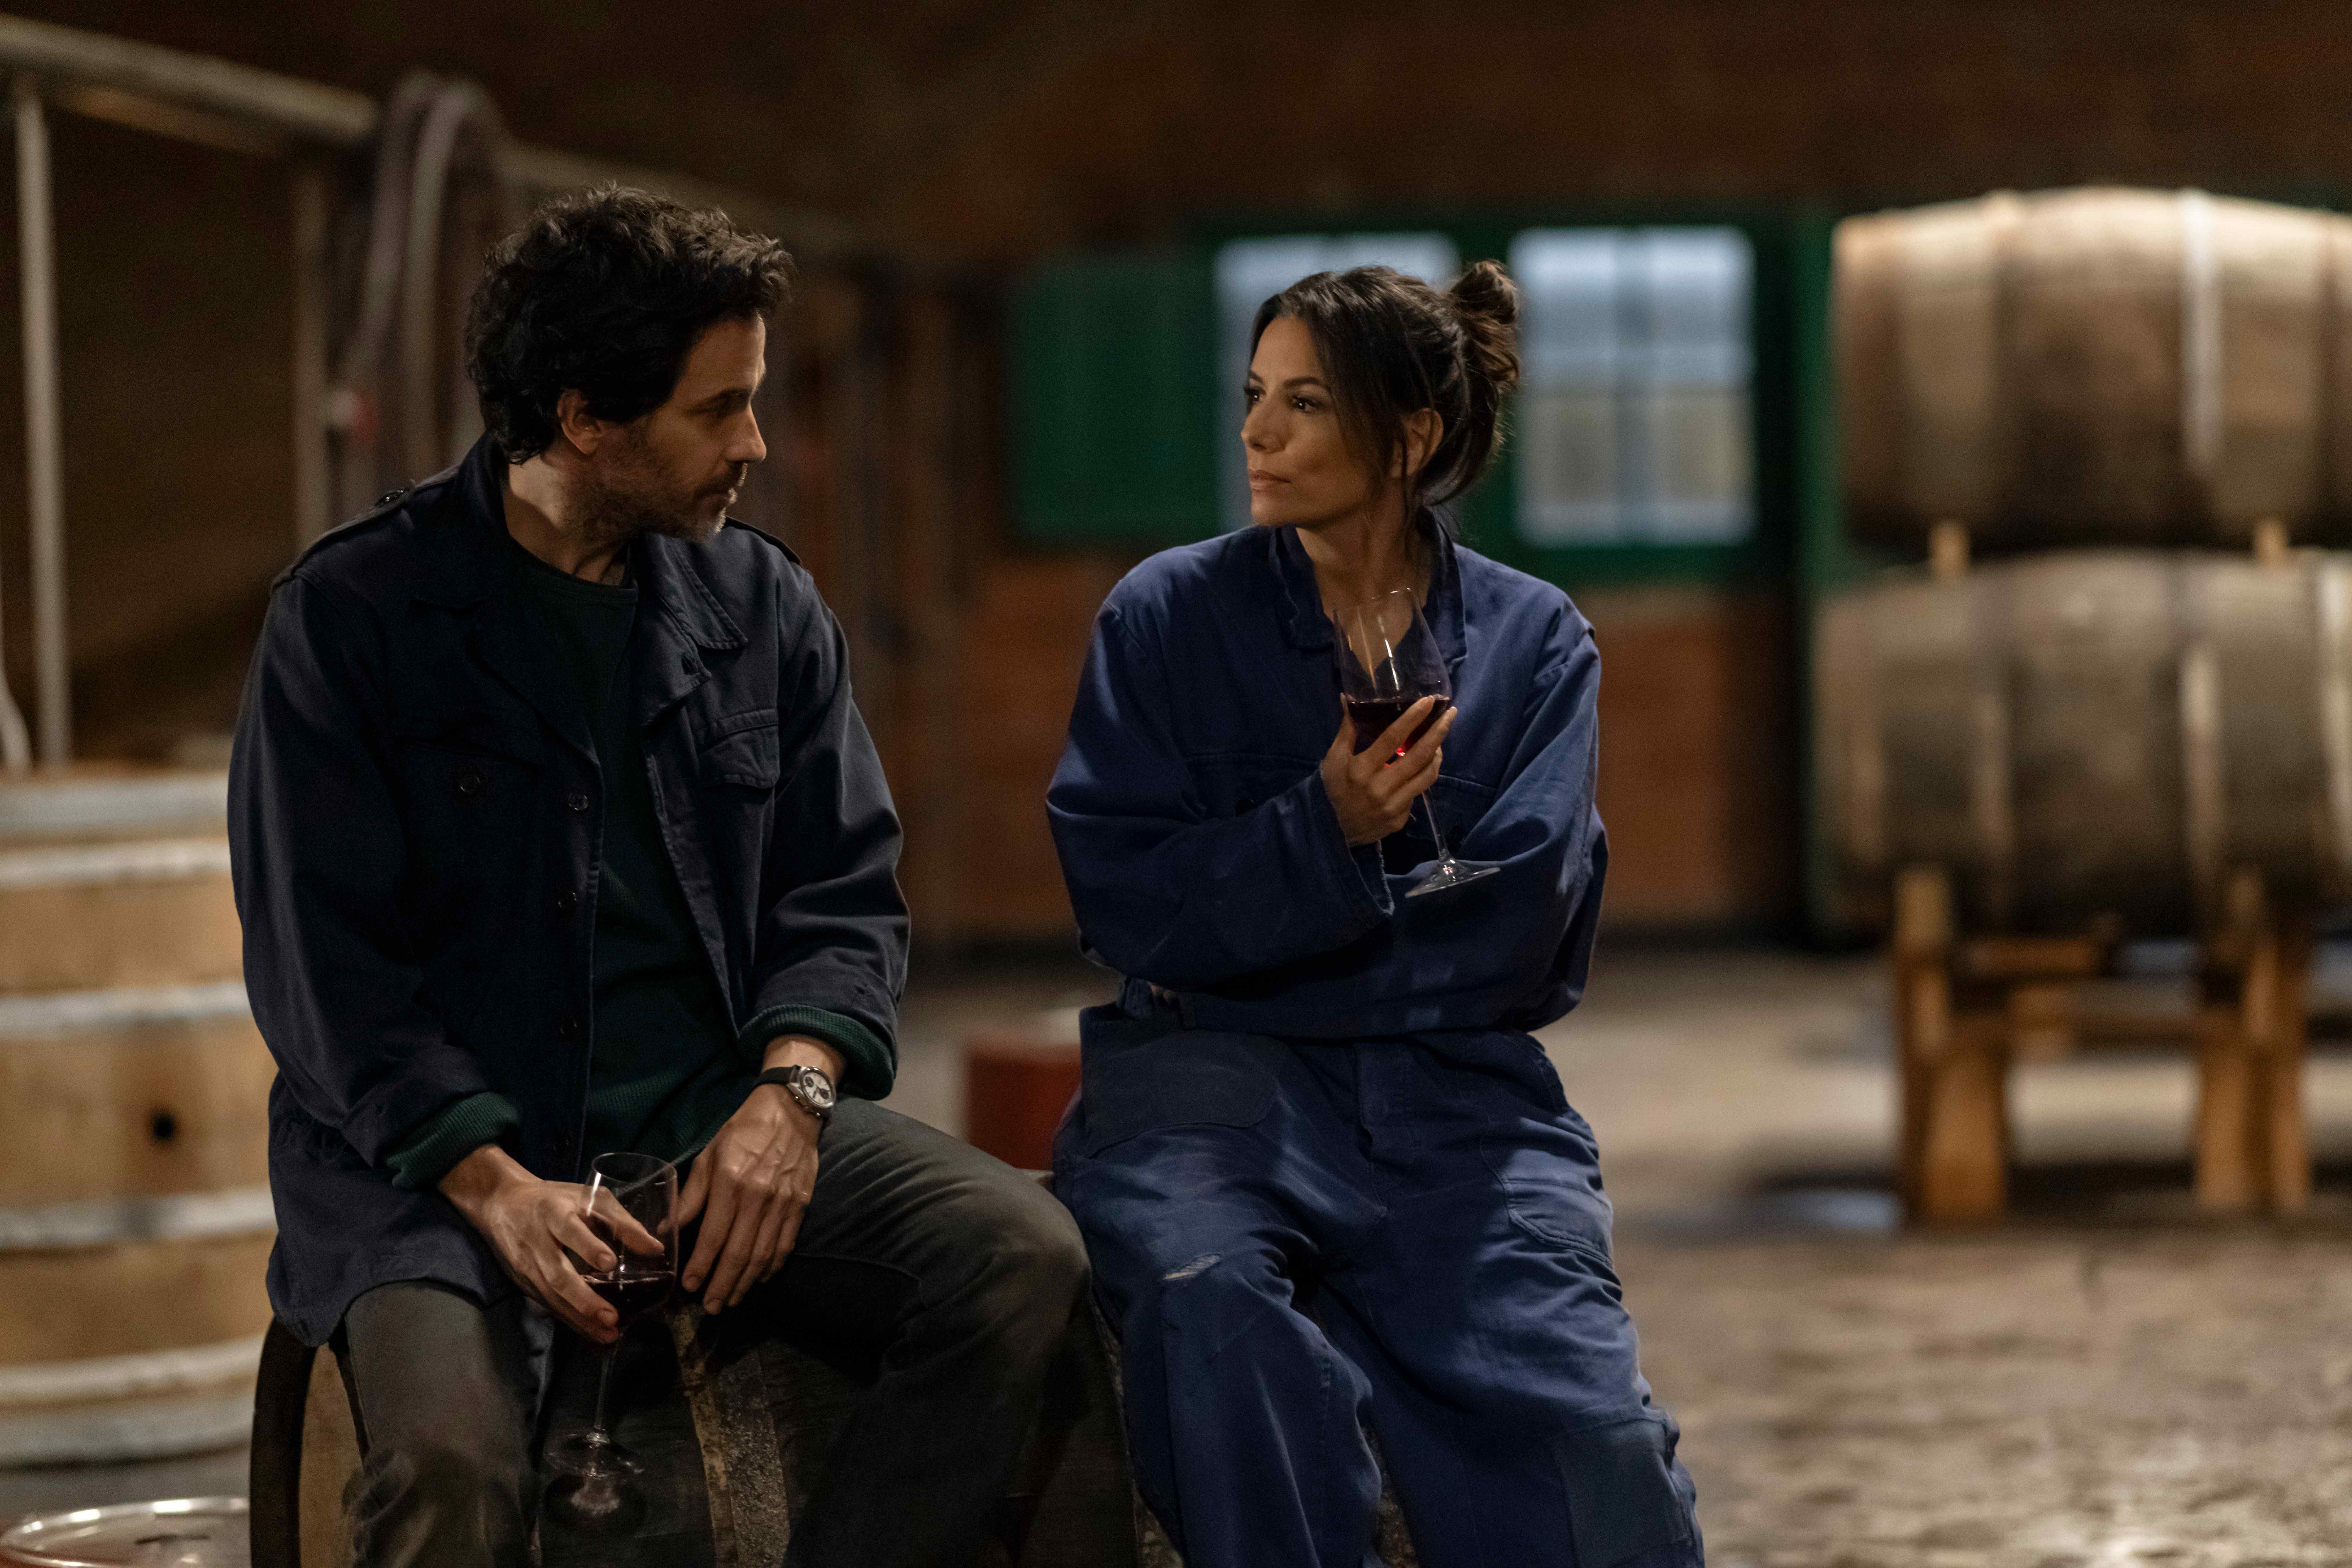 Eva Longoria Is Back On The Small Screen With Santiago Cabrera Of 'The Cleaning Lady' In Apple TV+'s 'Land Of Women'